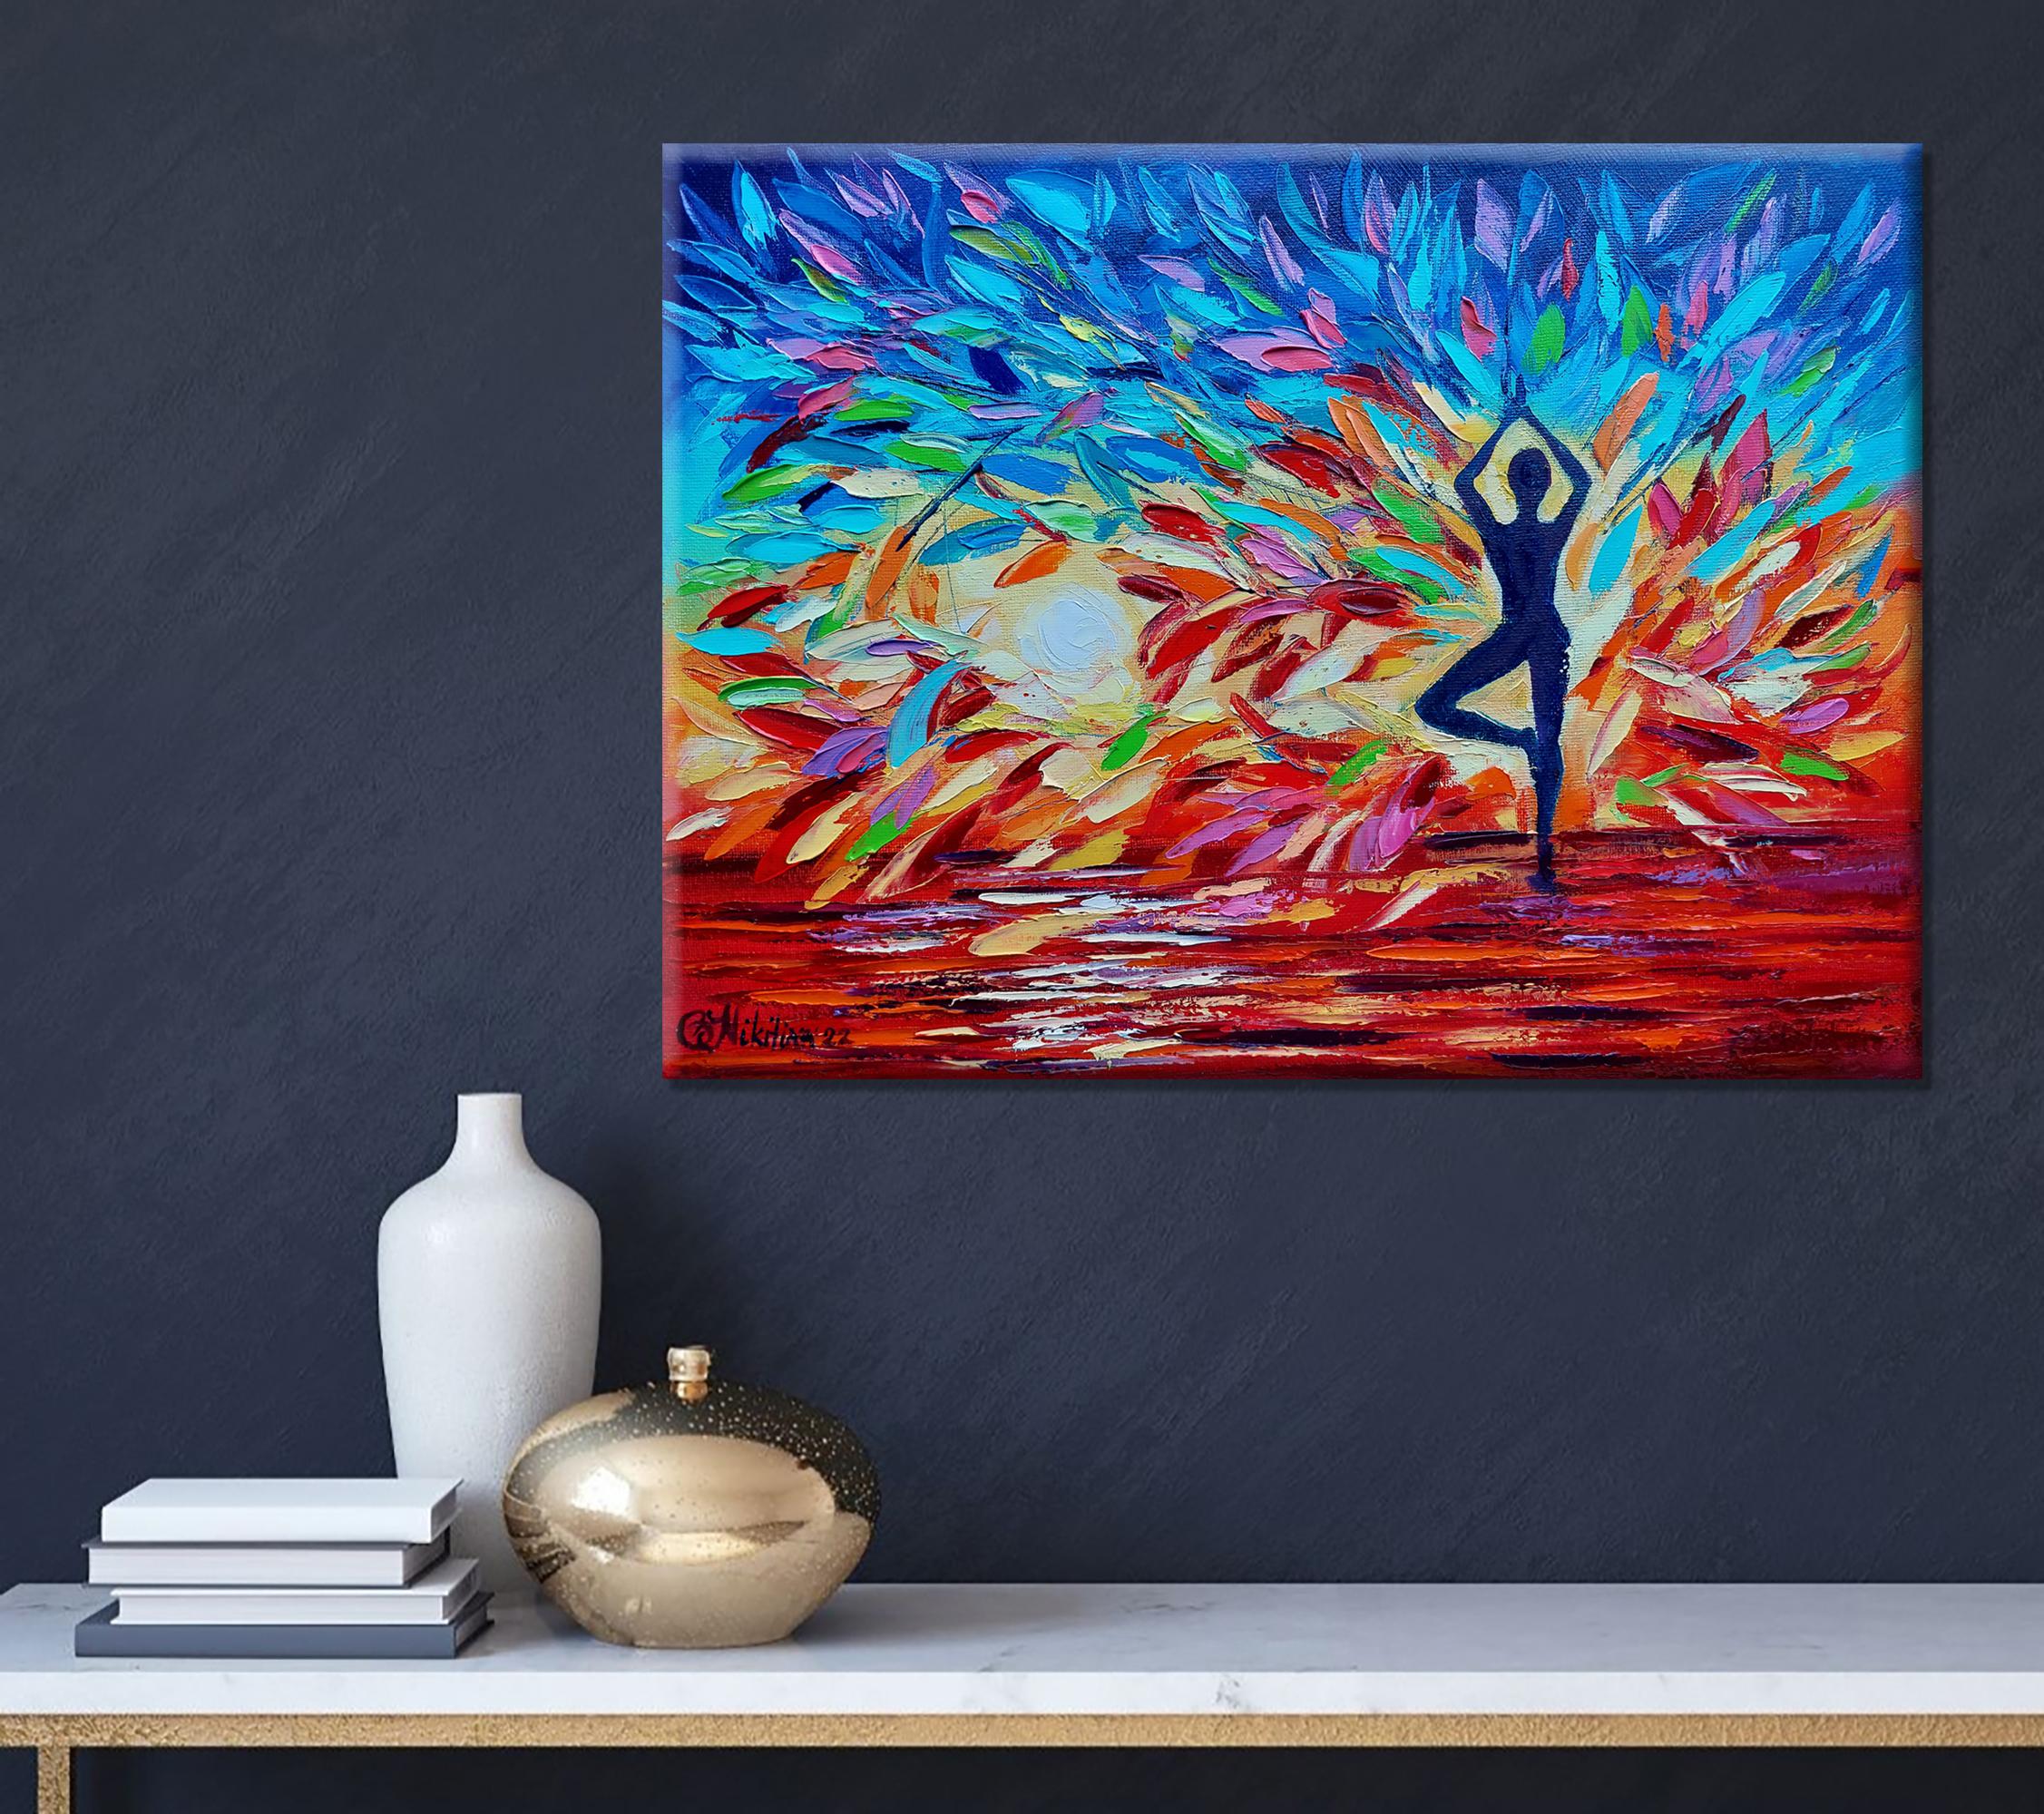 Tree of Life Painting Yoga Artwork Reiki Original Art Impasto Painting Esoteric Wall Art Palette Knife Art by OlgaNikitinArt

⭐ Title: Tree of Life. Reiki Art
⭐ Size 12x16 inches
⭐ Materials: oil paints, stretched canvas, palette knife
⭐ Shipping: